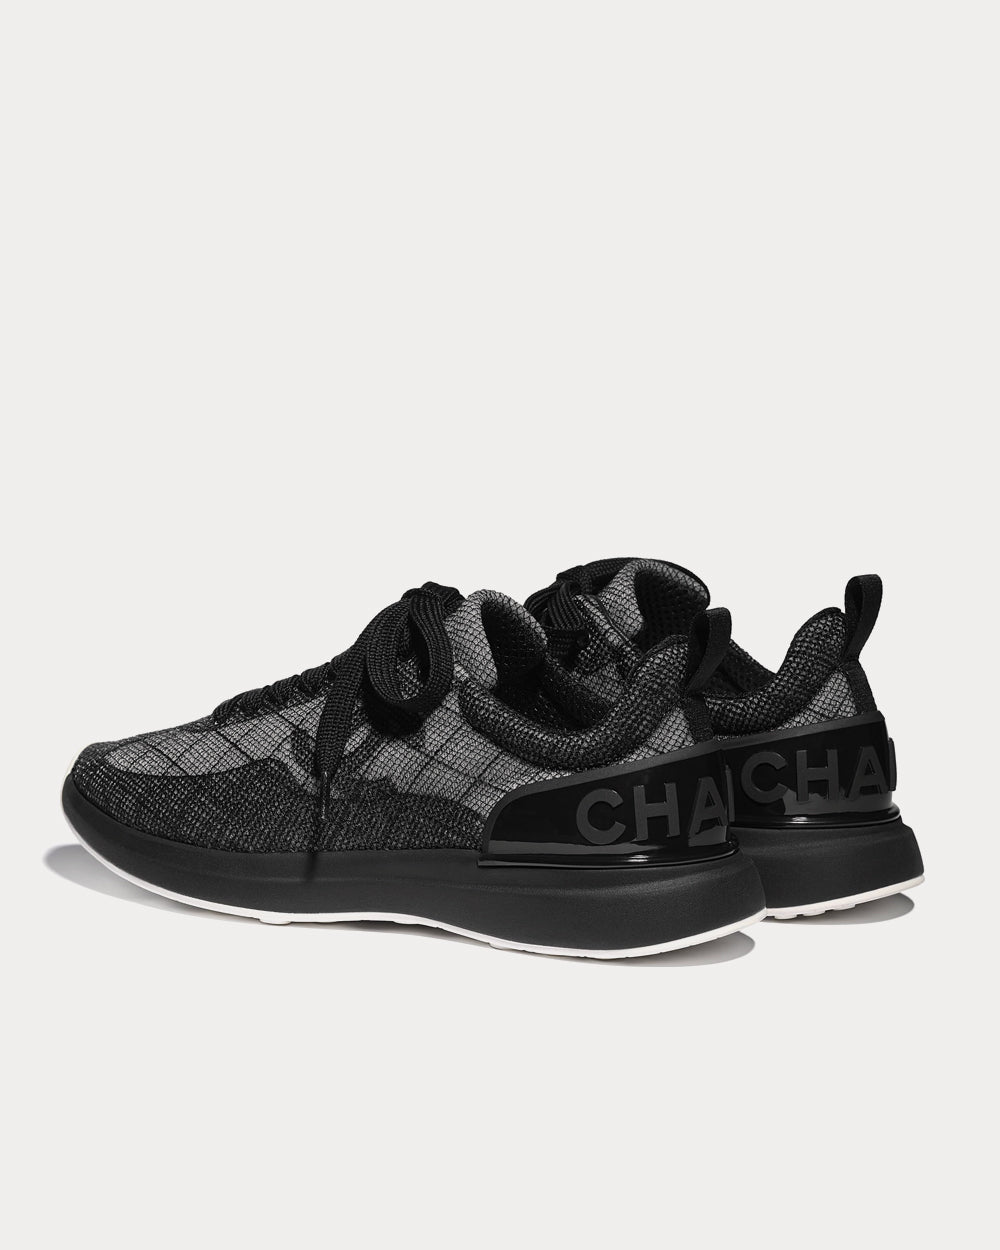 Chanel - Embroidered Mesh Black Low Top Sneakers